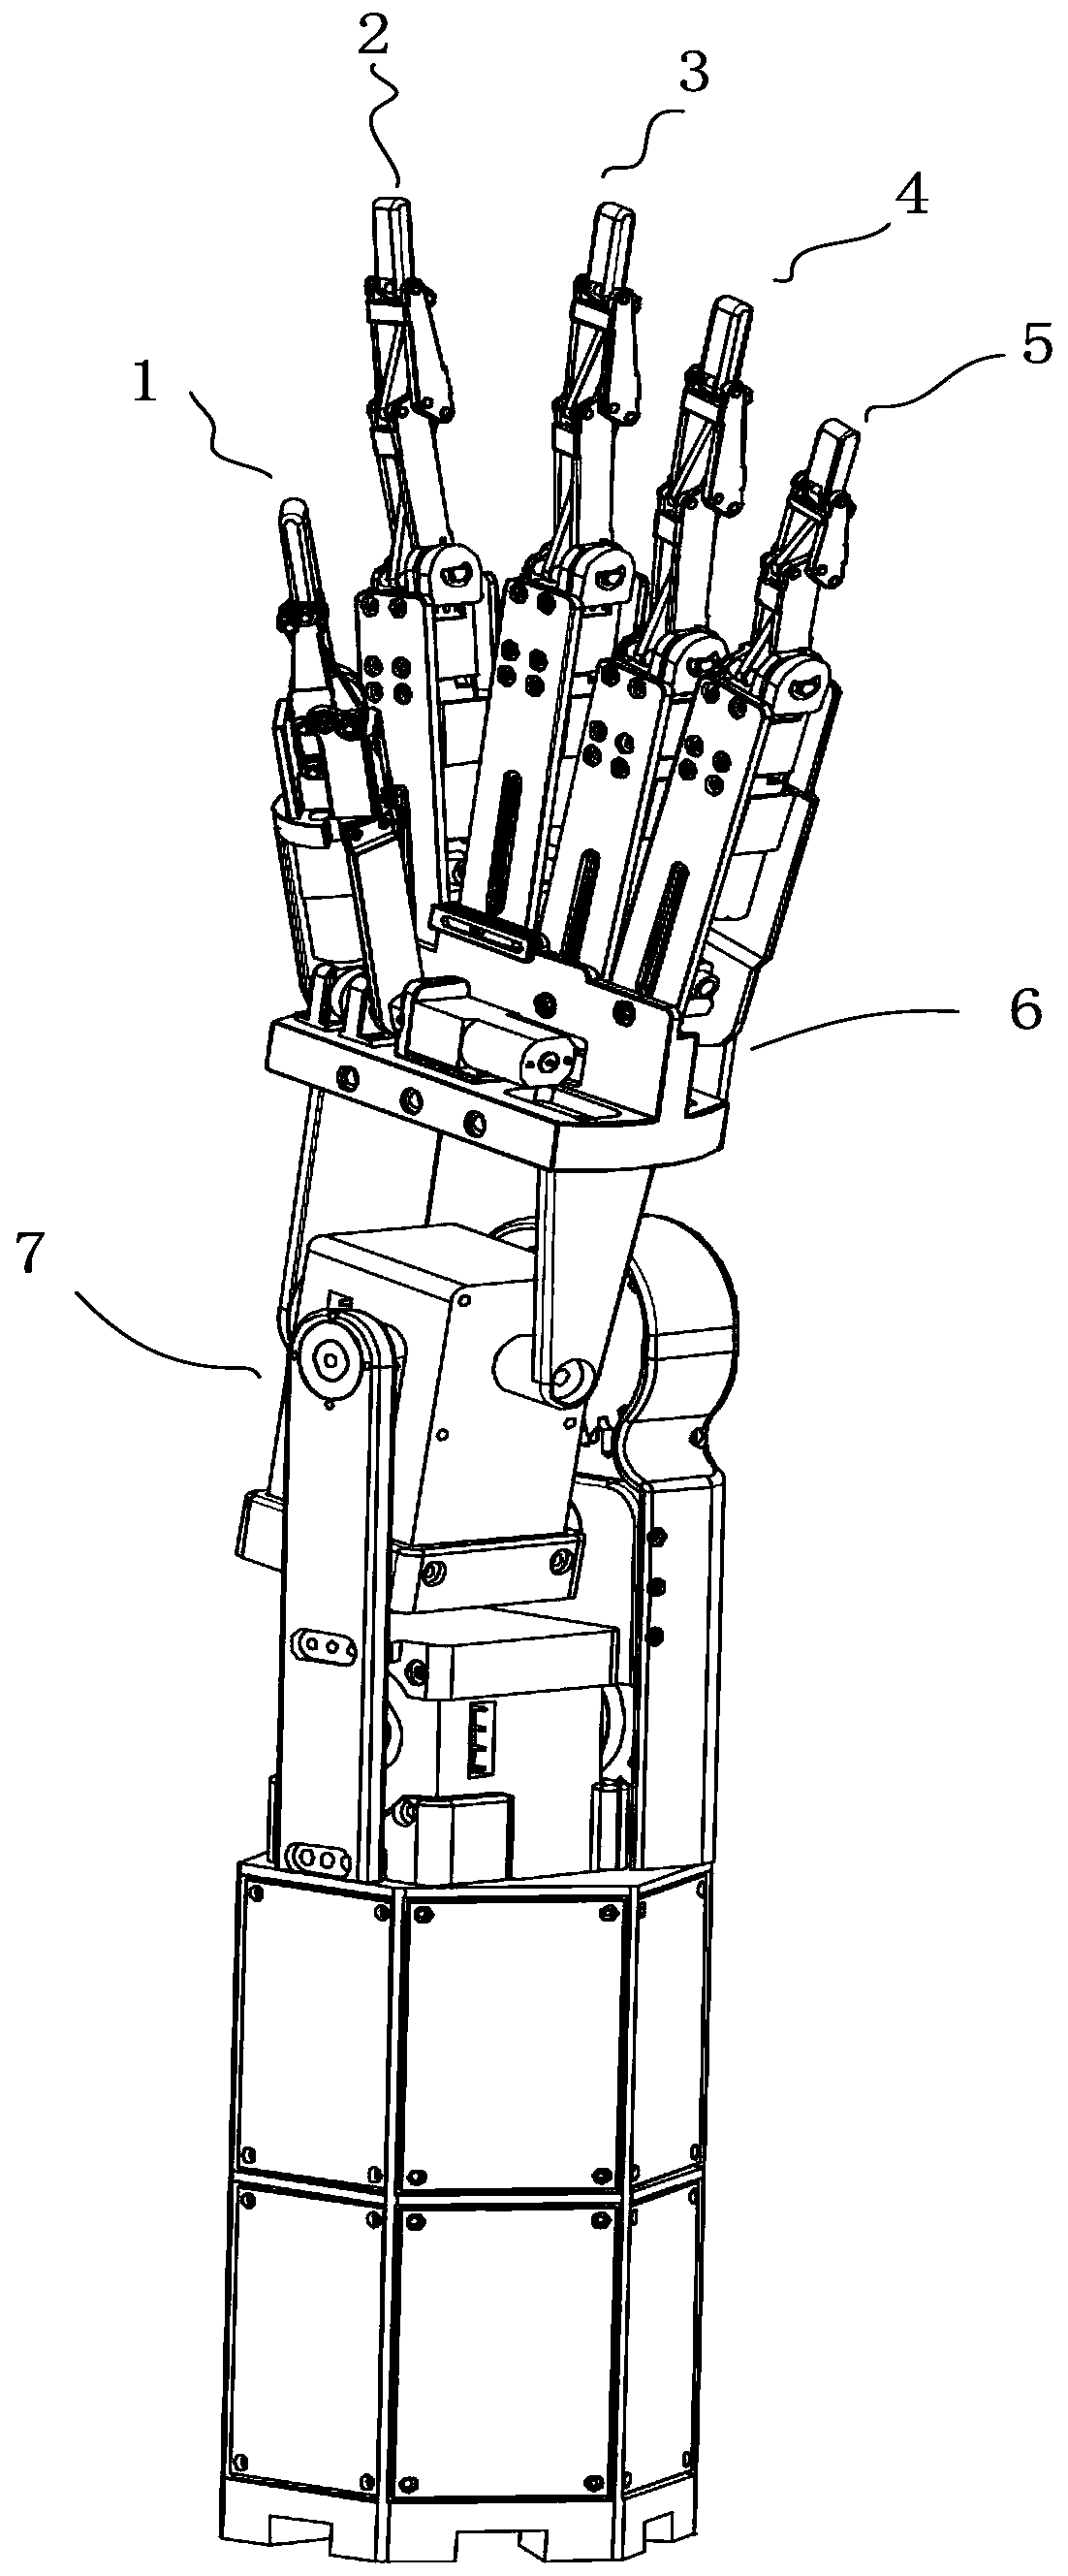 Under-actuated dexterous hand with bifurcated palm and coaxial rotating wrist